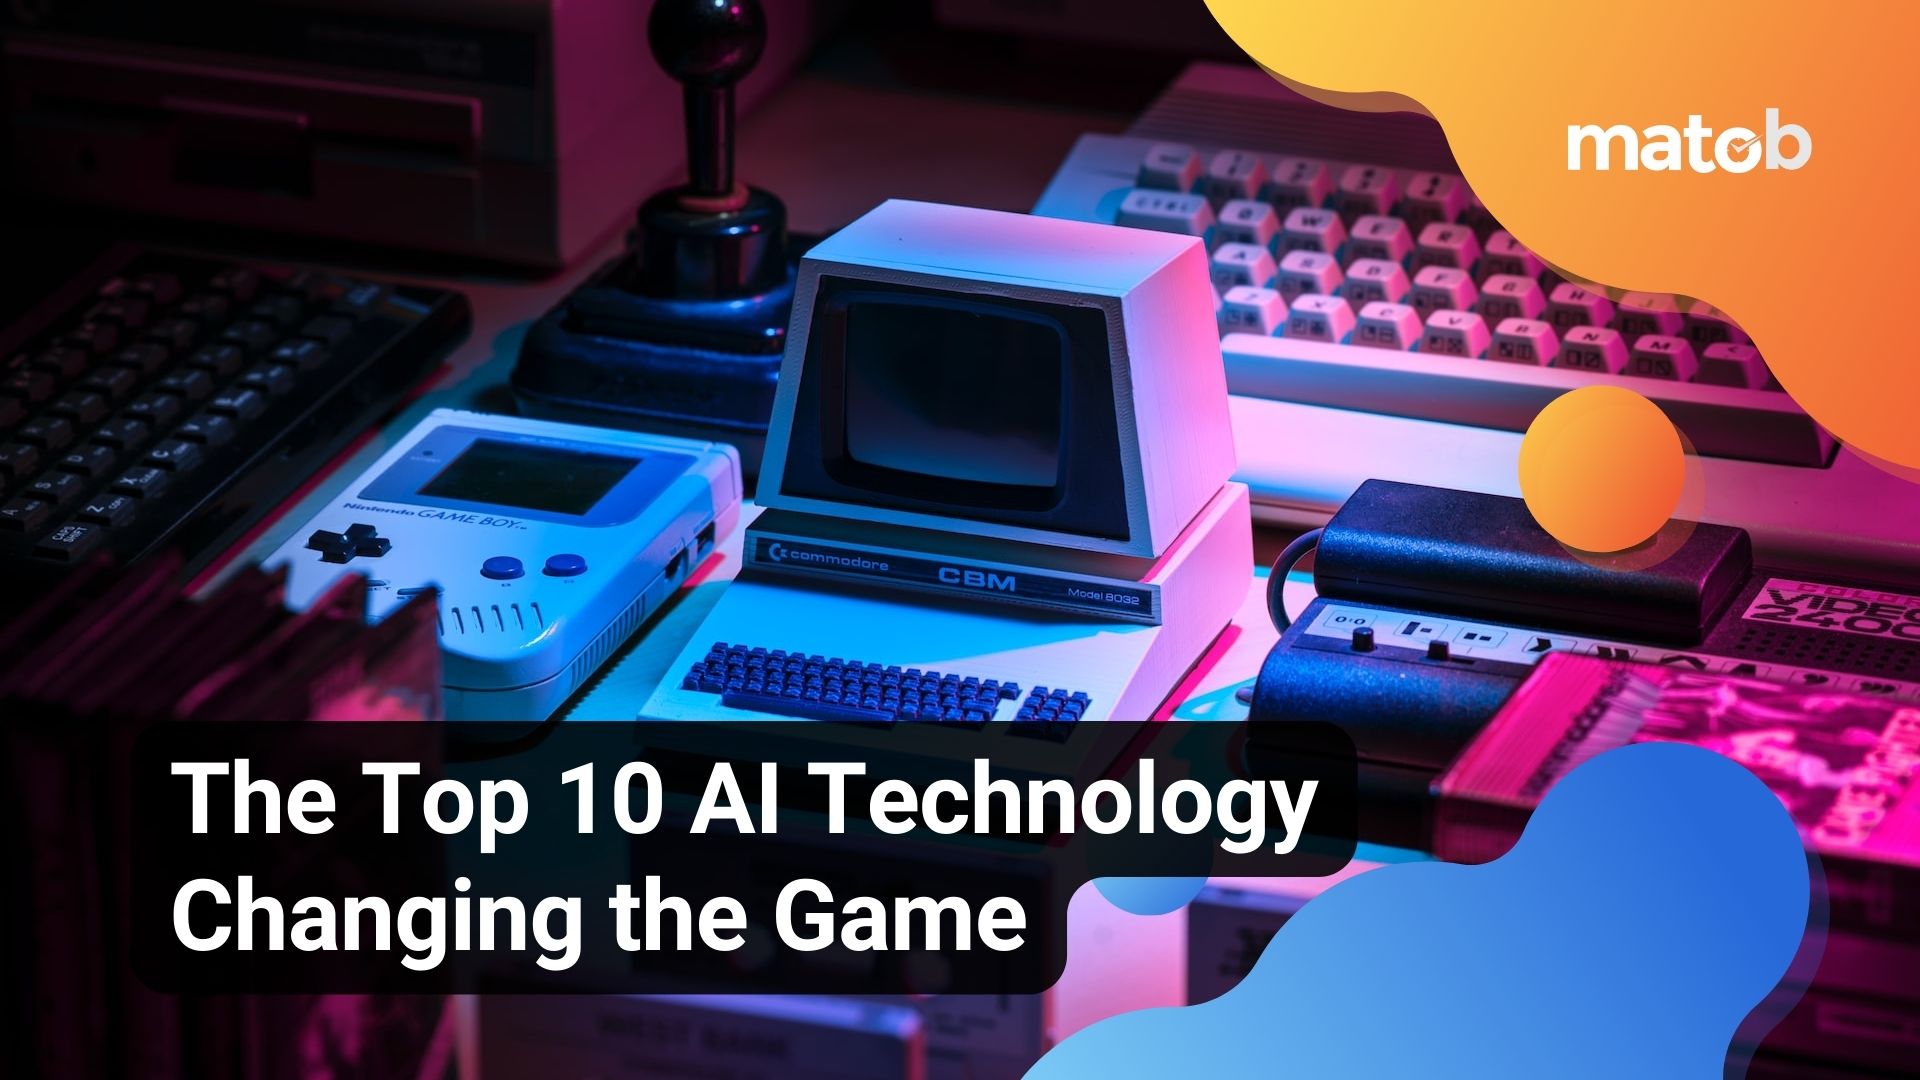 The Top 10 AI Technology Changing the Game